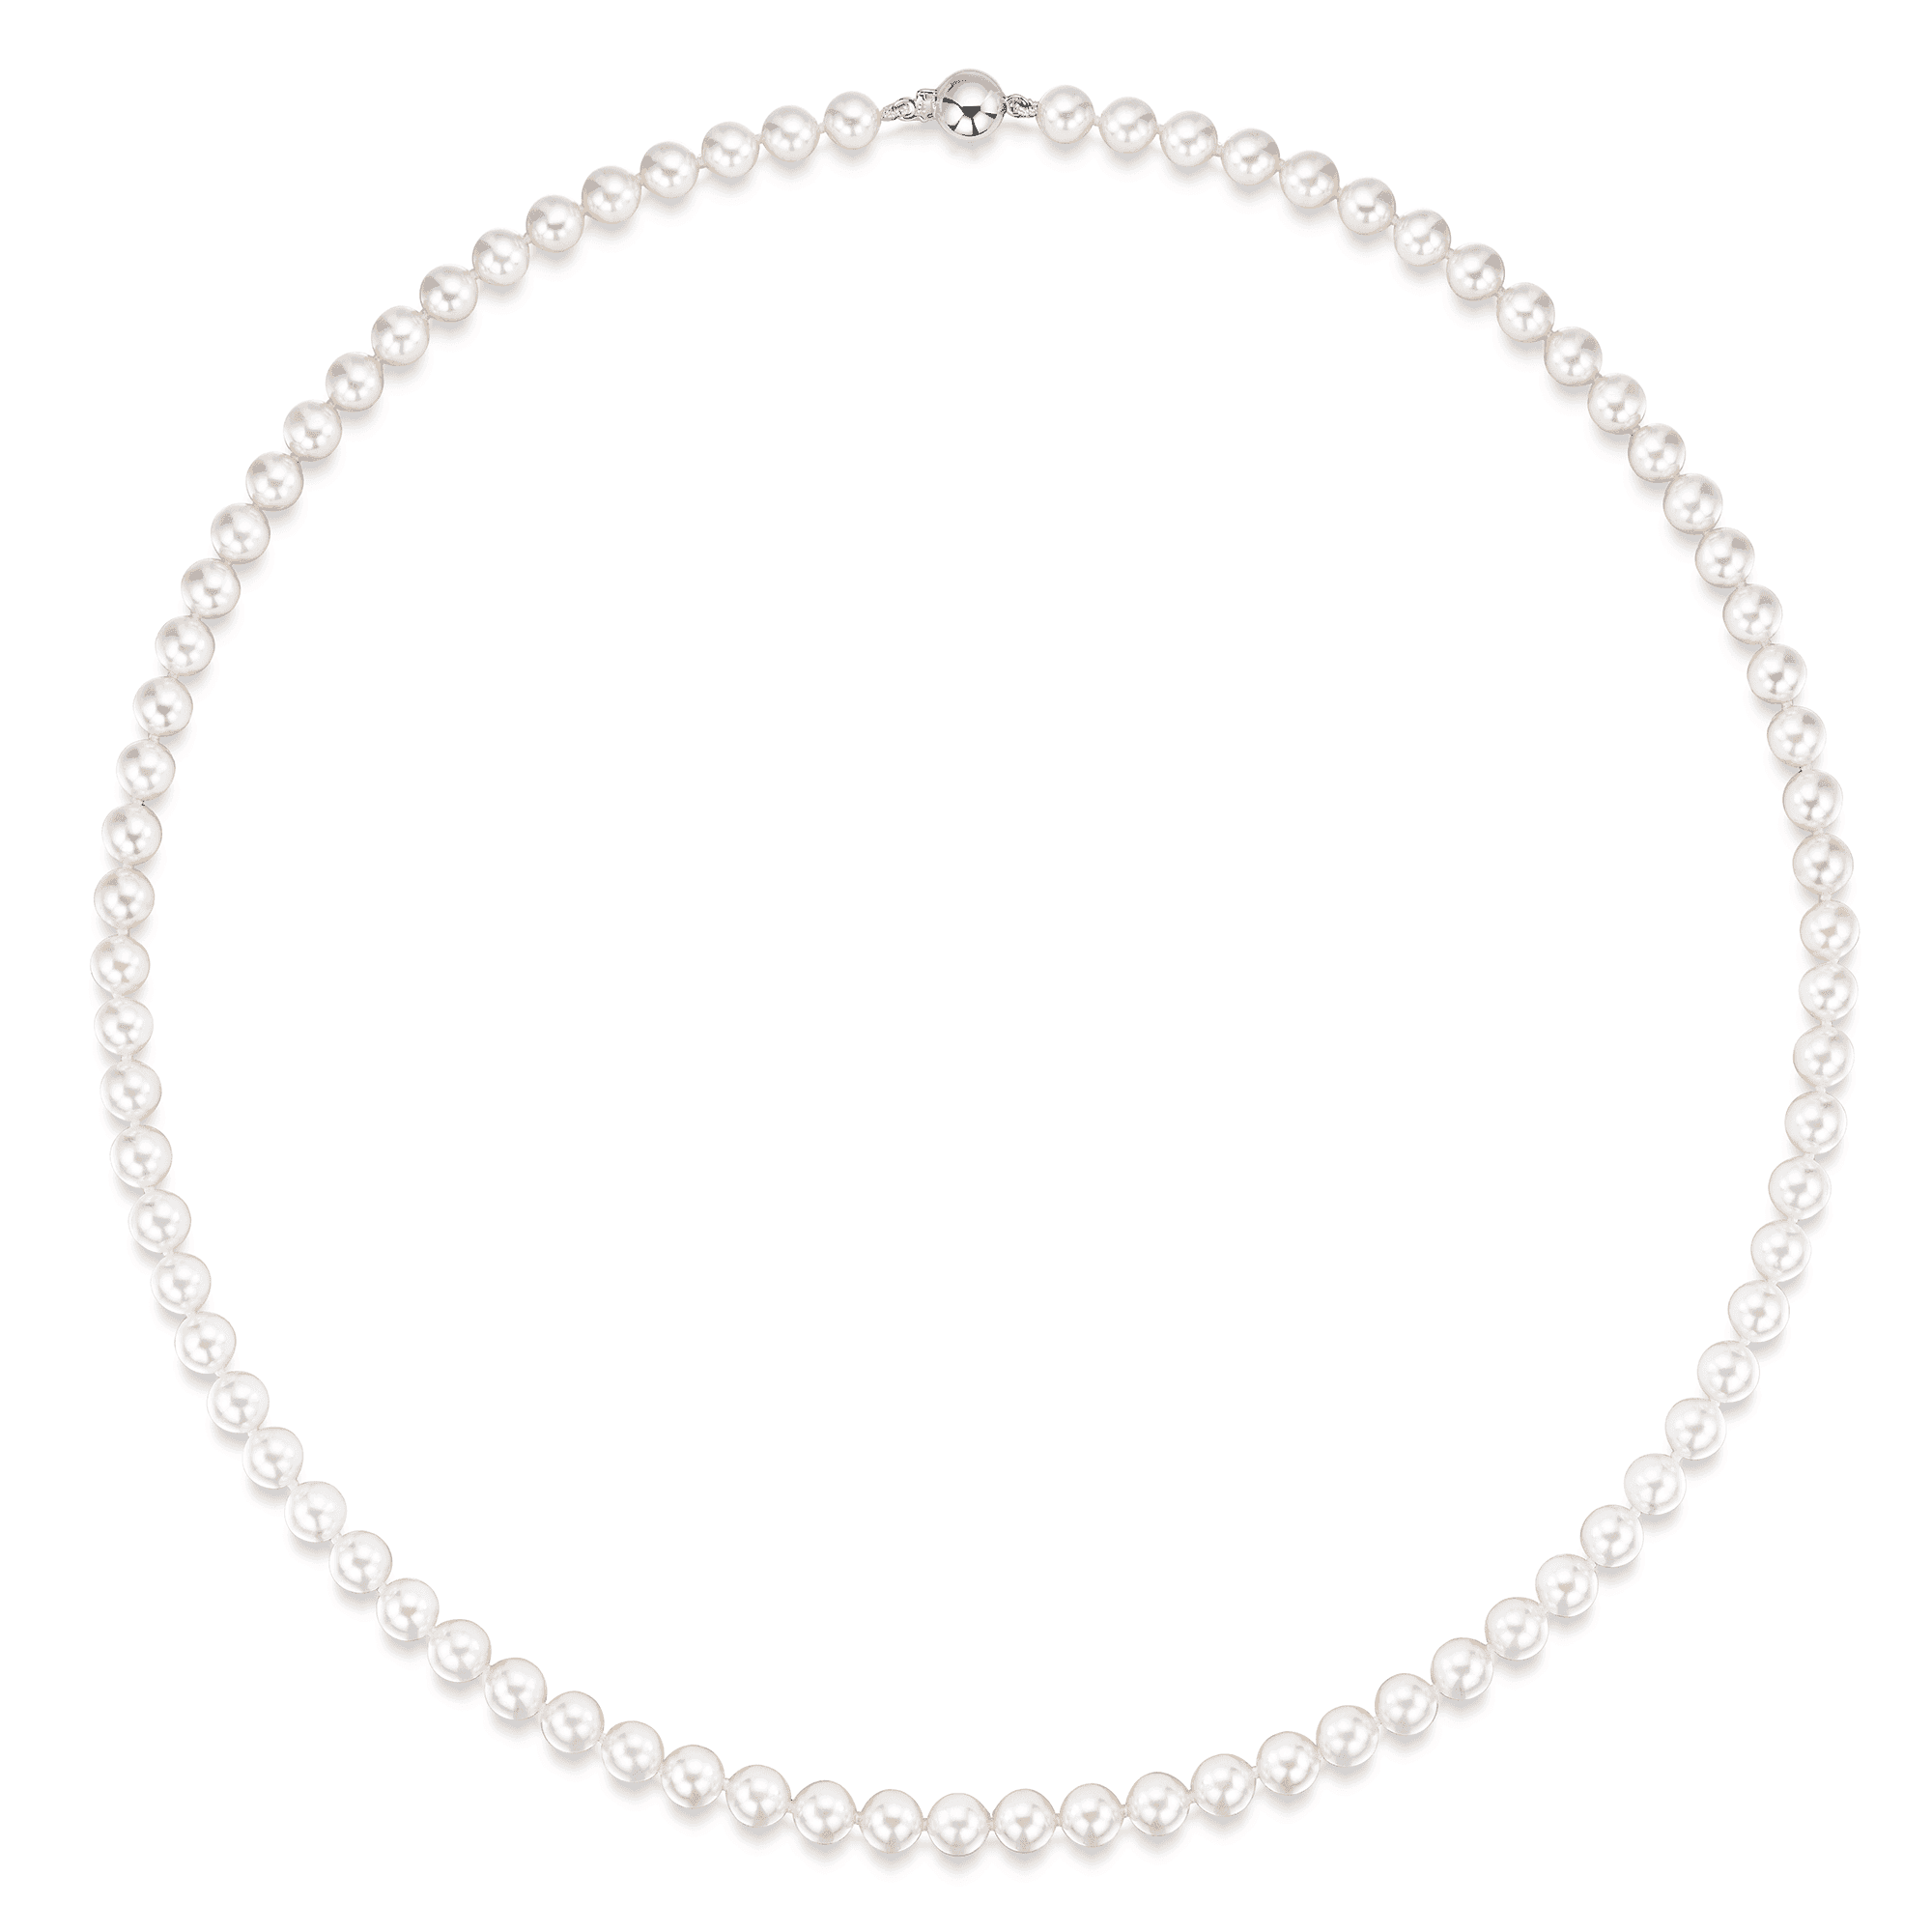 Akoya 5-5.5mm Pearl Necklet with 18ct White Gold Ball Clasp